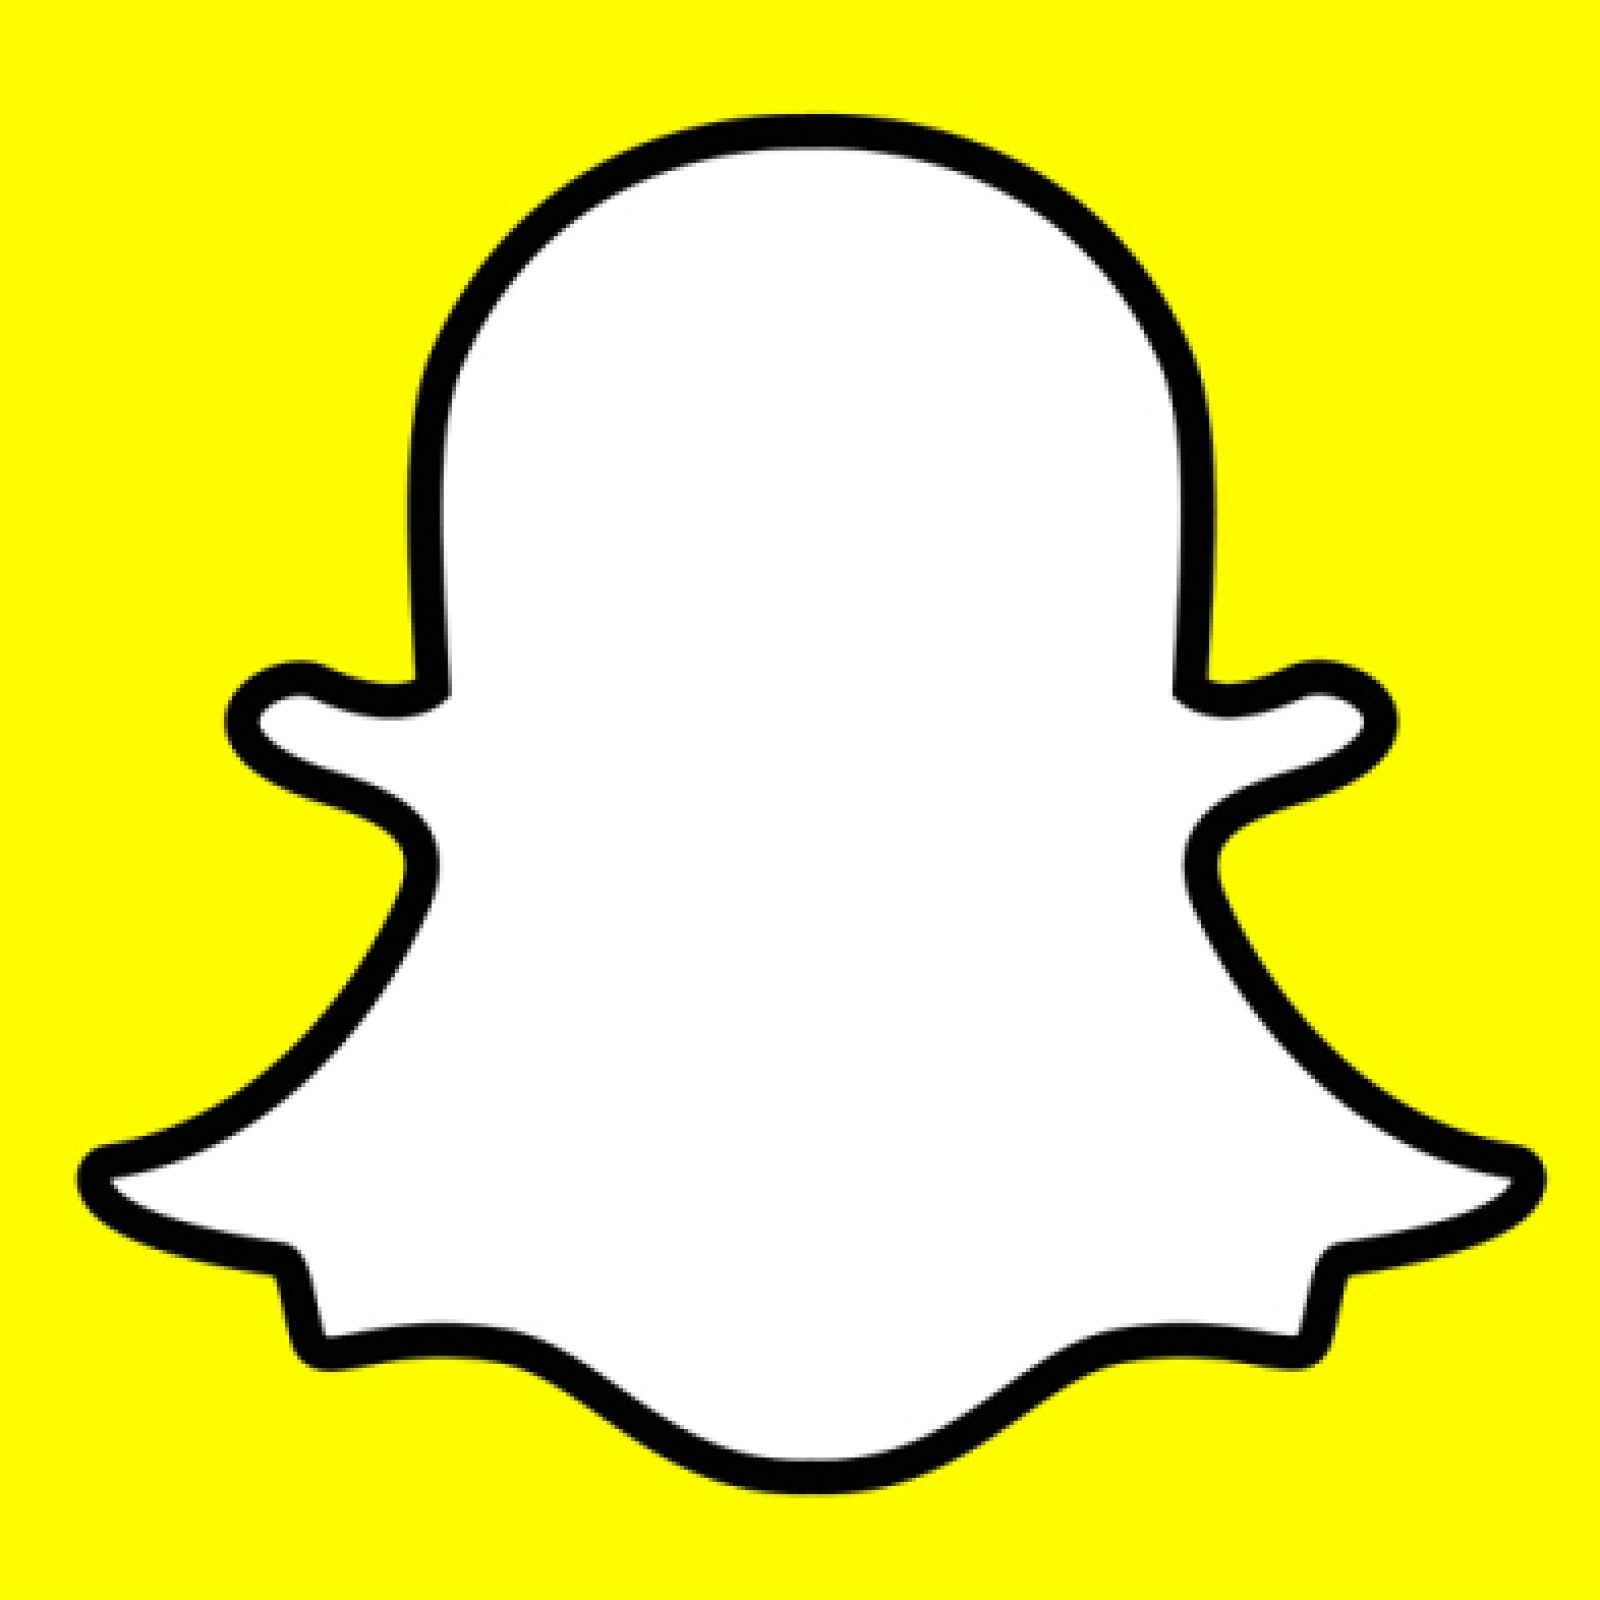 How to Half Open a Snap on Snapchat: Keep Sender From Knowing You've Seen Snap With This Trick